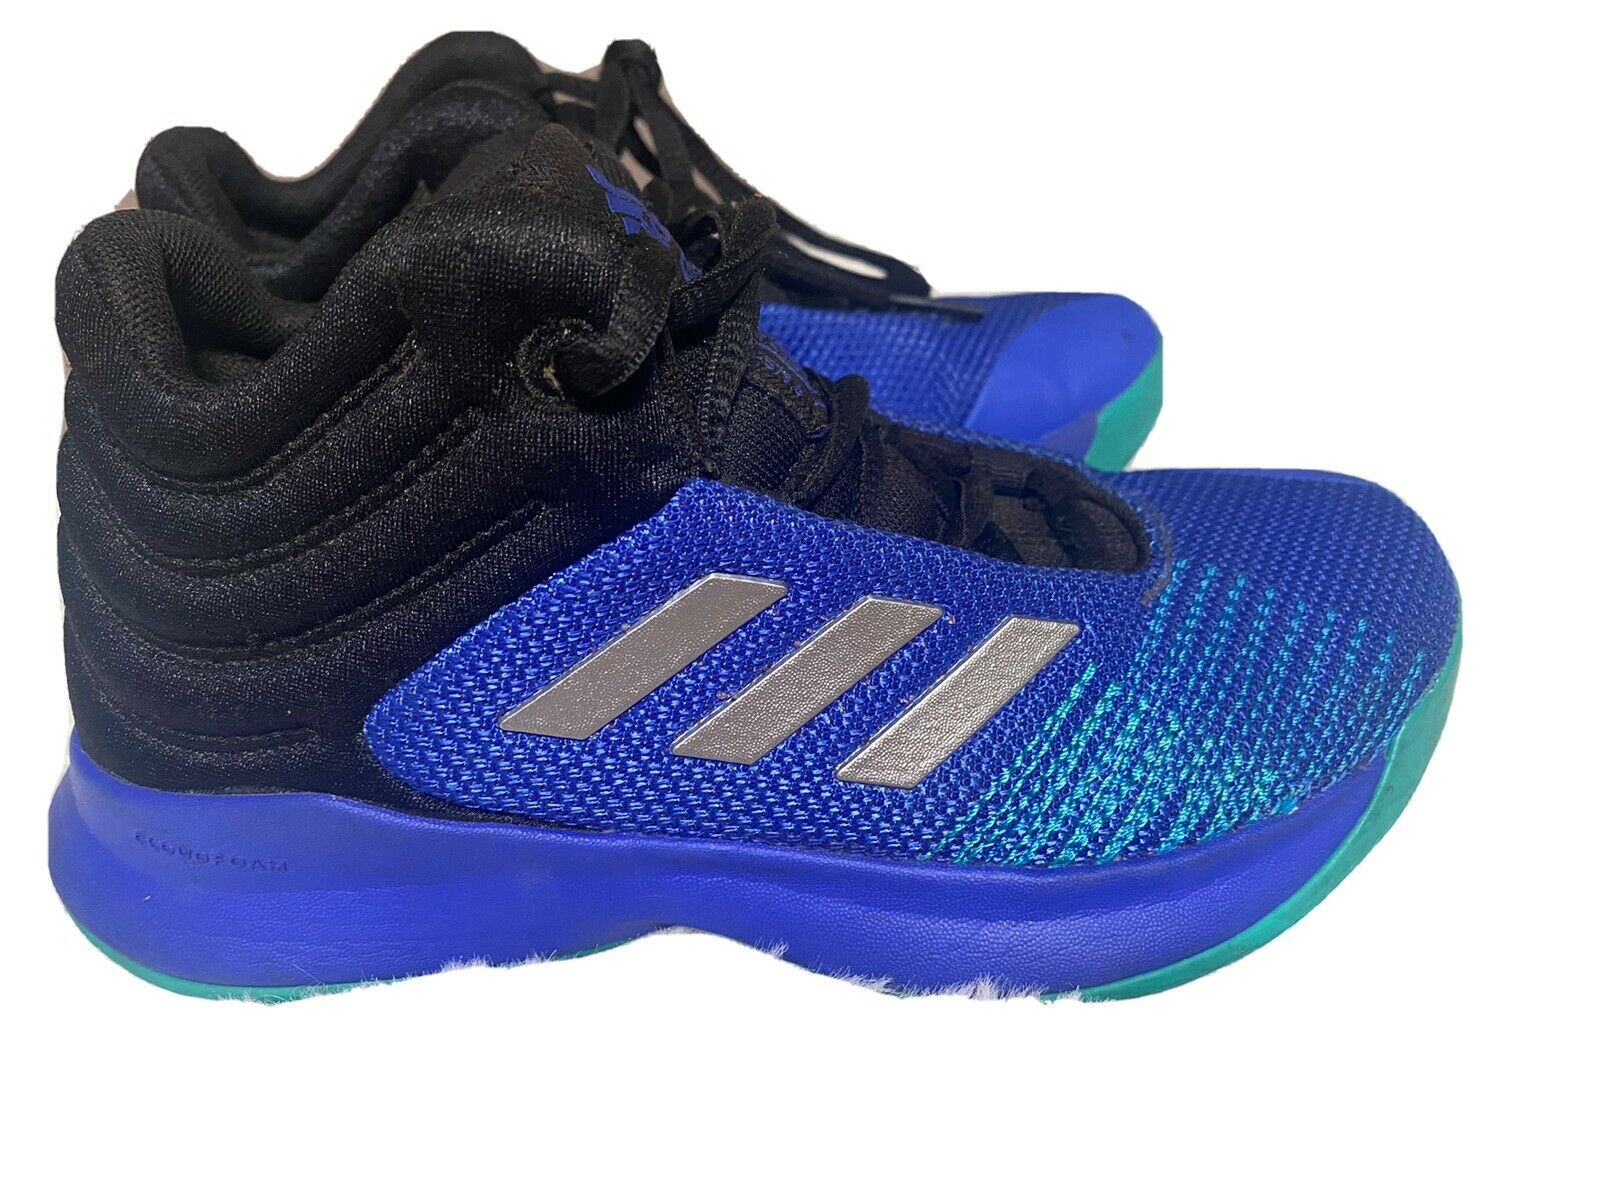 adidas Kids Boys Pro Spark 2018 Lace Up - Basketball Sneakers Shoes Size 13